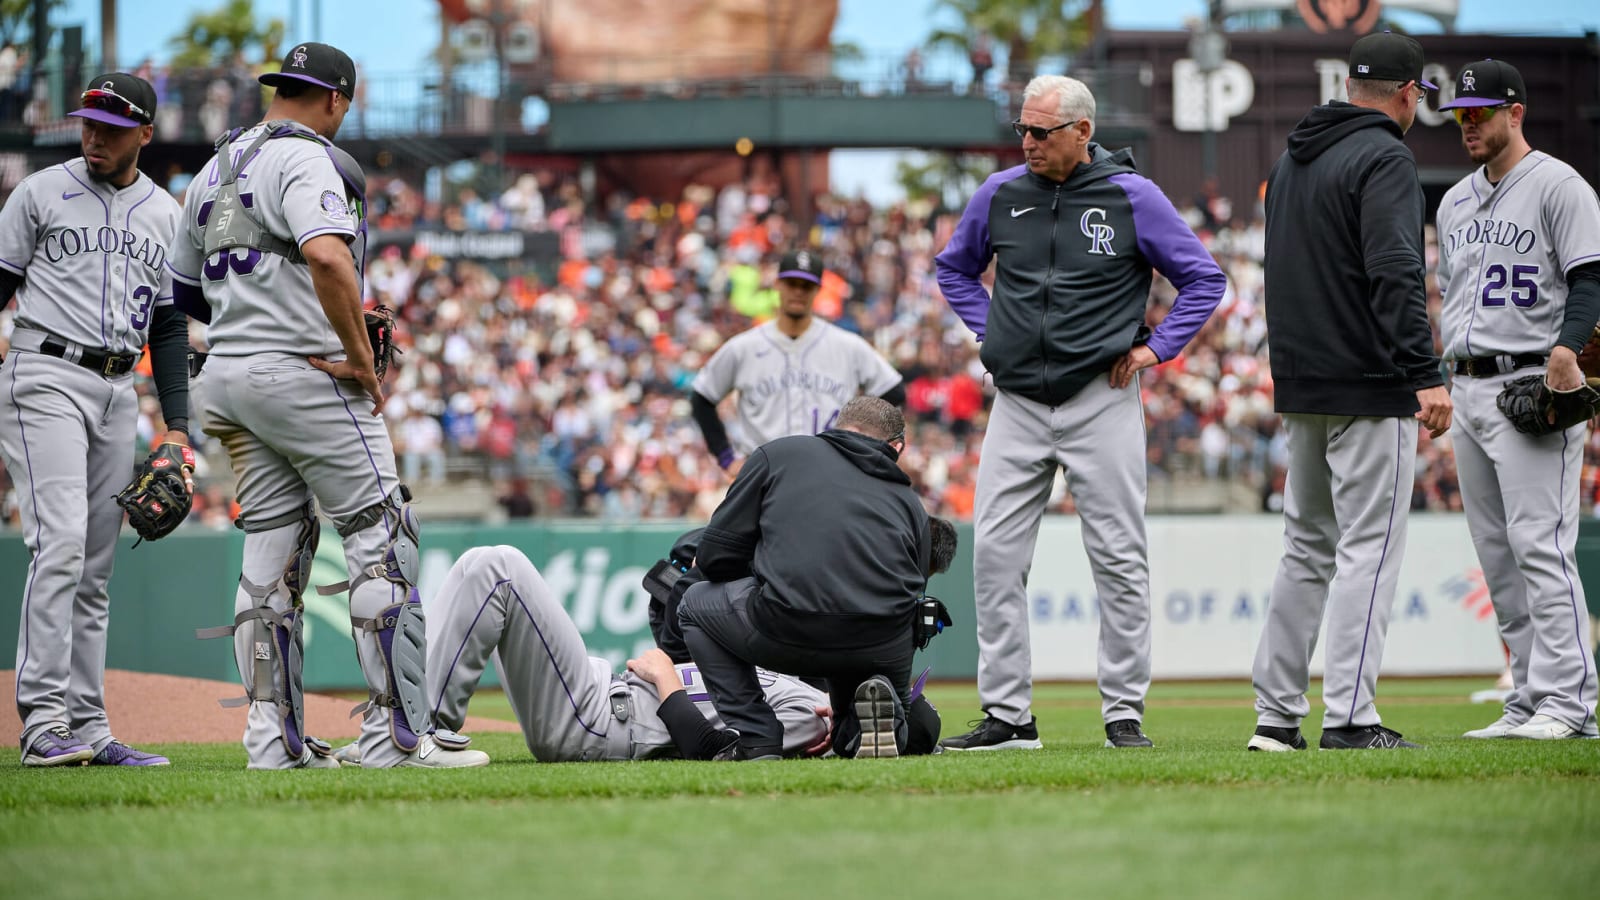 Rockies starter goes down in agony with injury